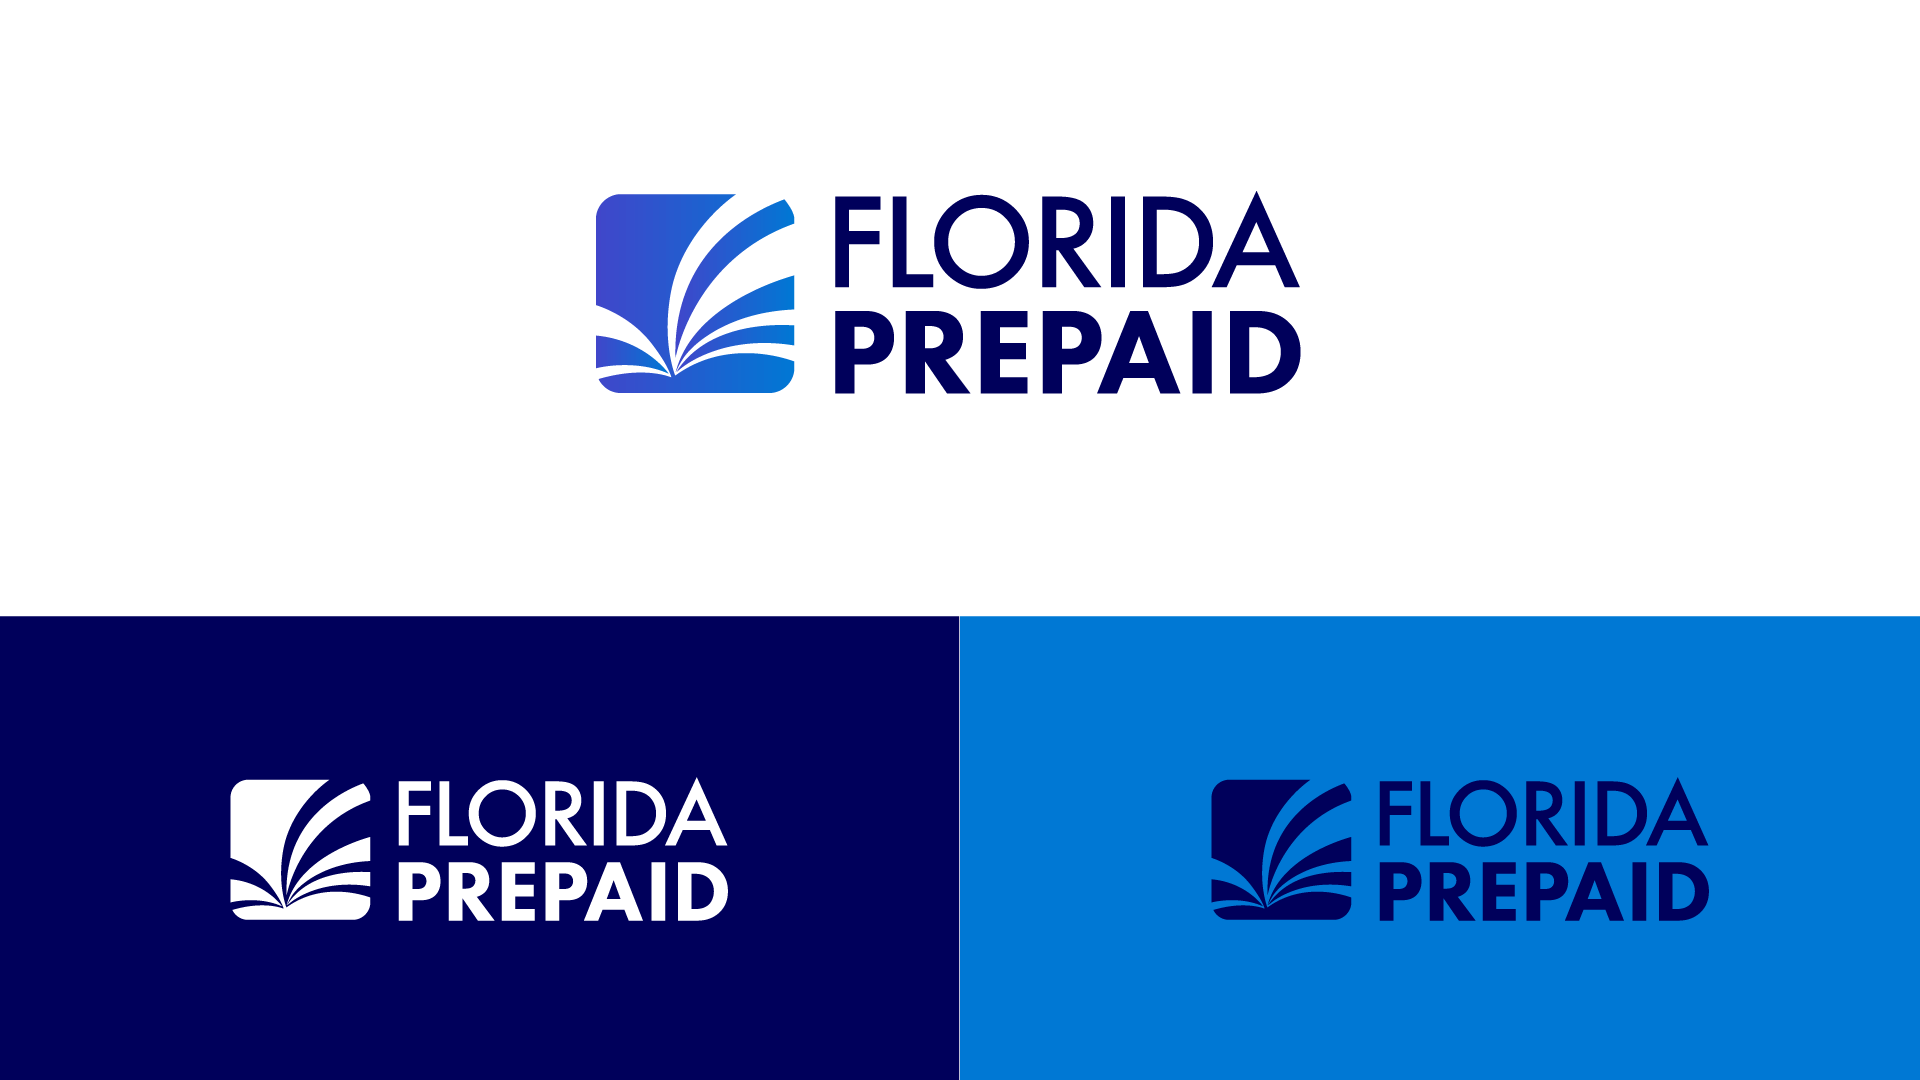 Image displaying the new Florida Prepaid logo in three different color stages, full color, single white color and another option with just a dark blue color.